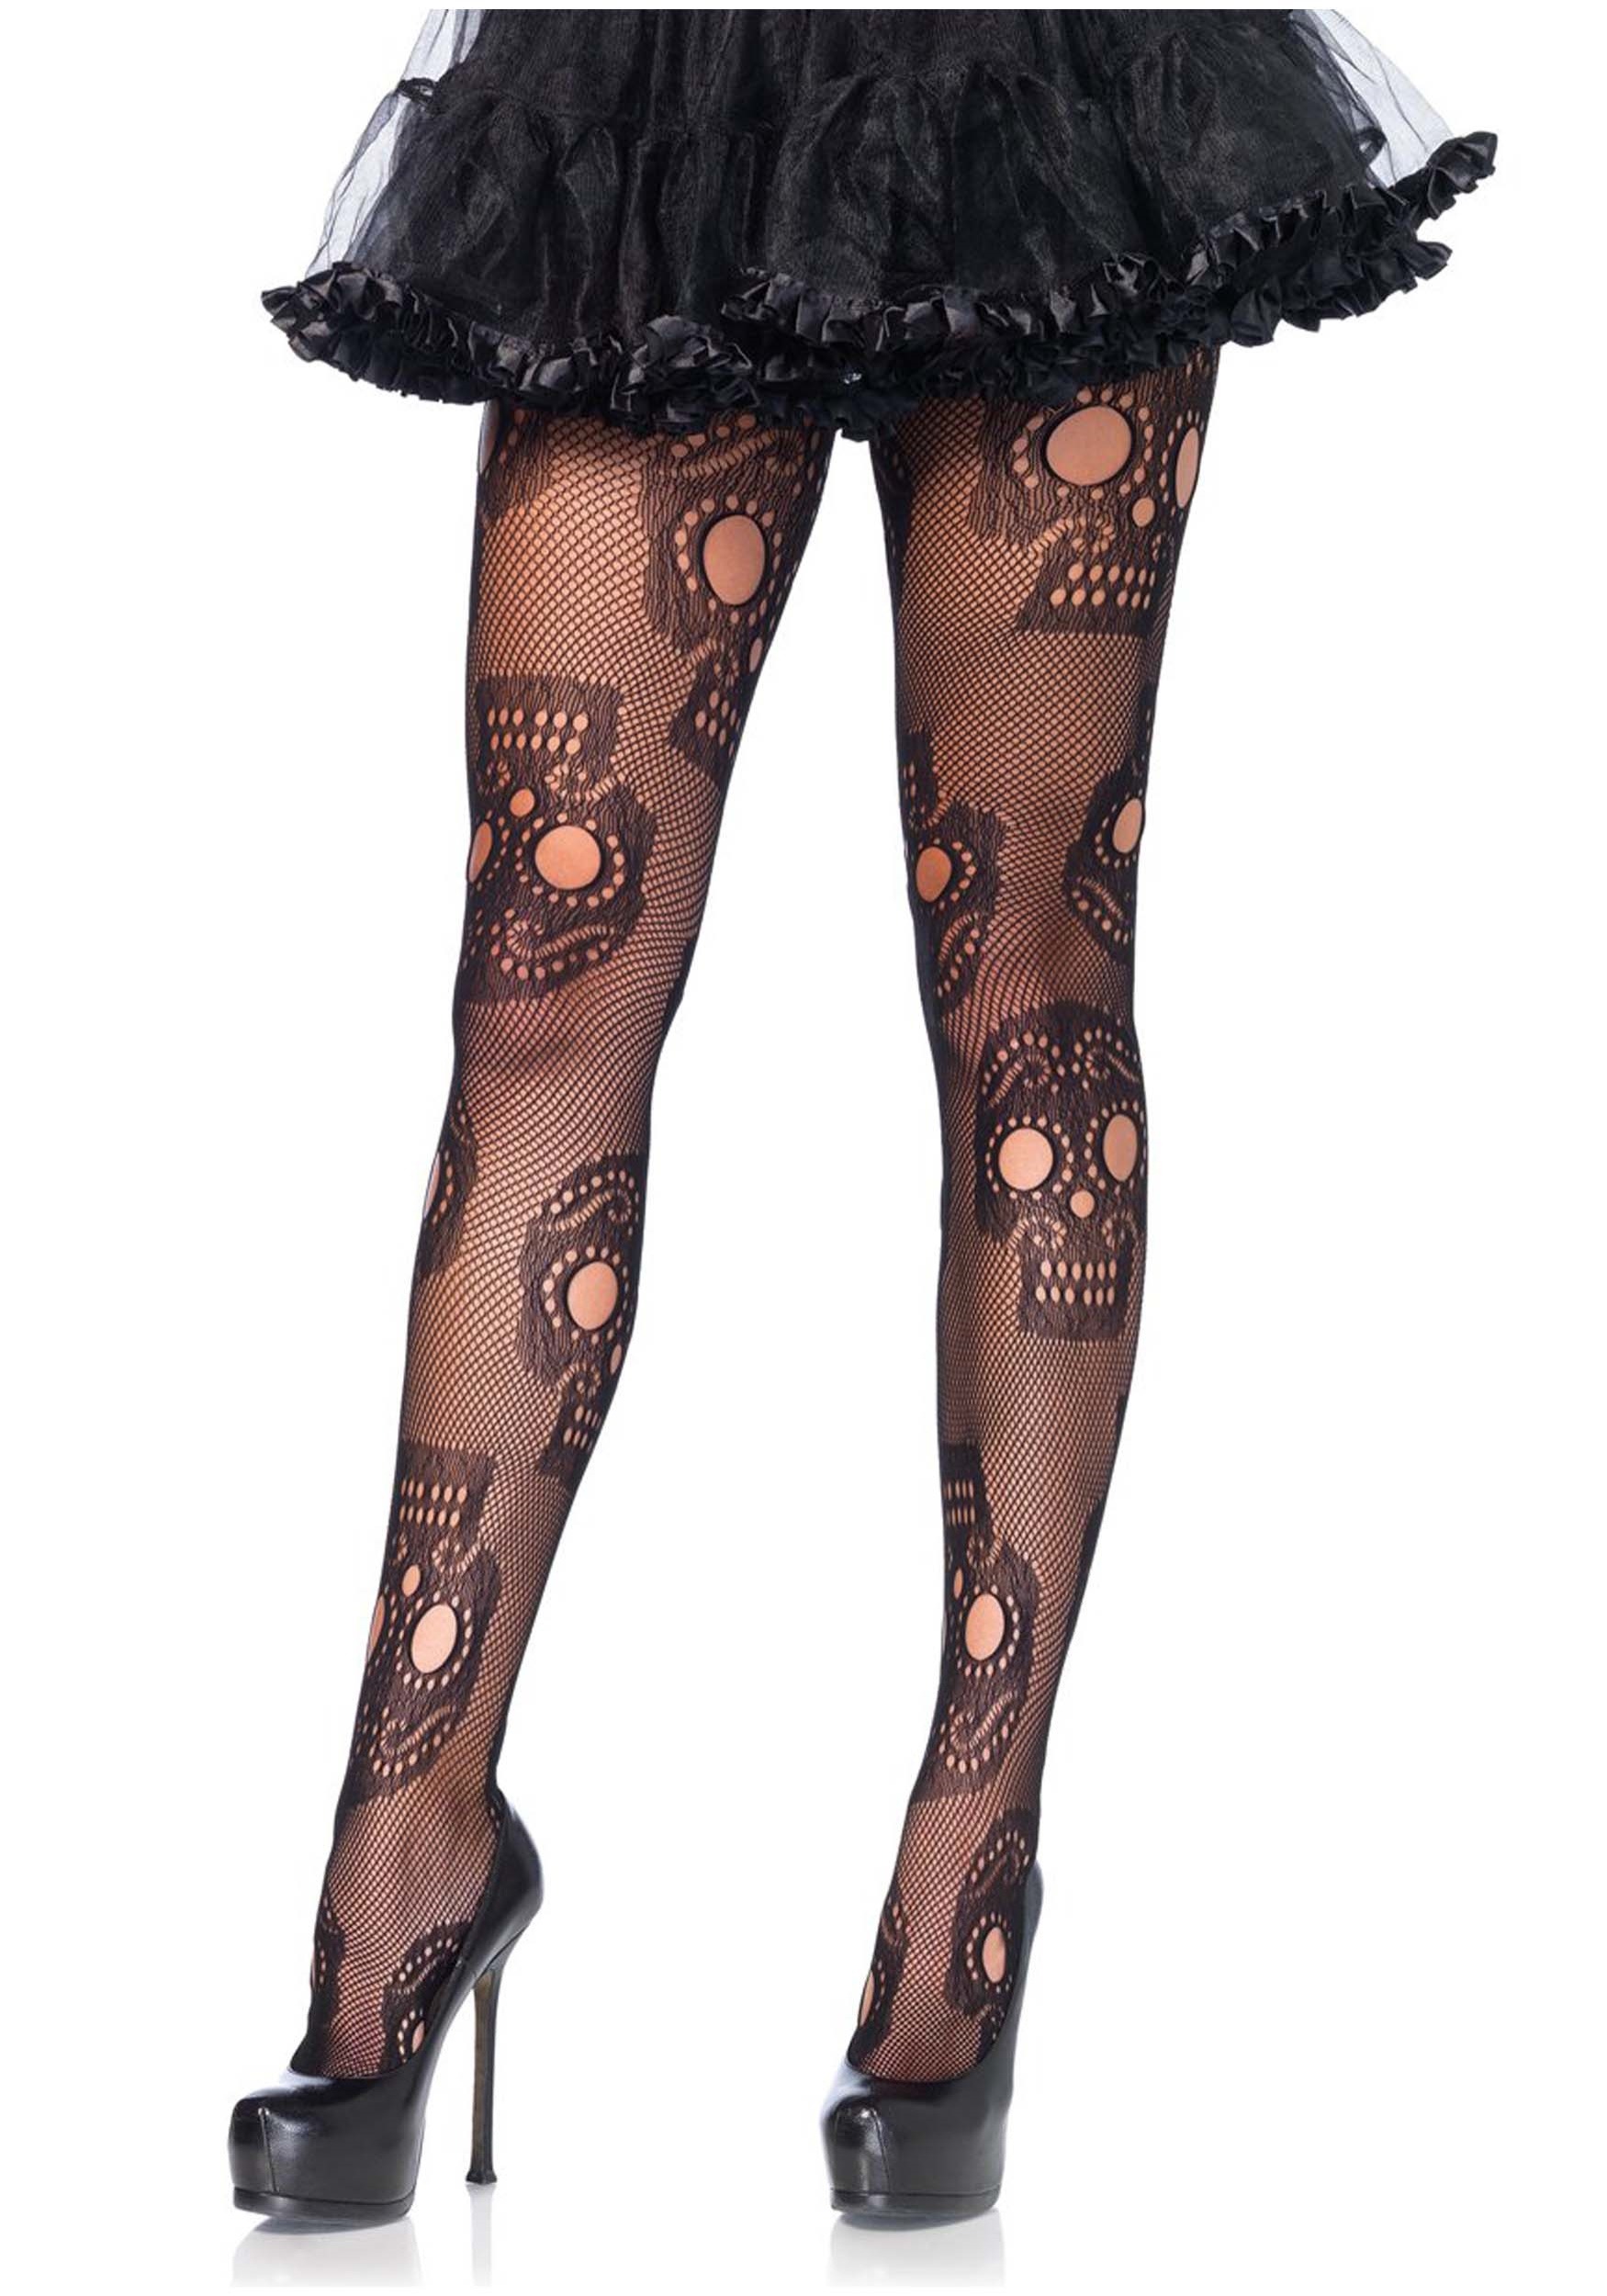 Day of the Dead Womens Tights